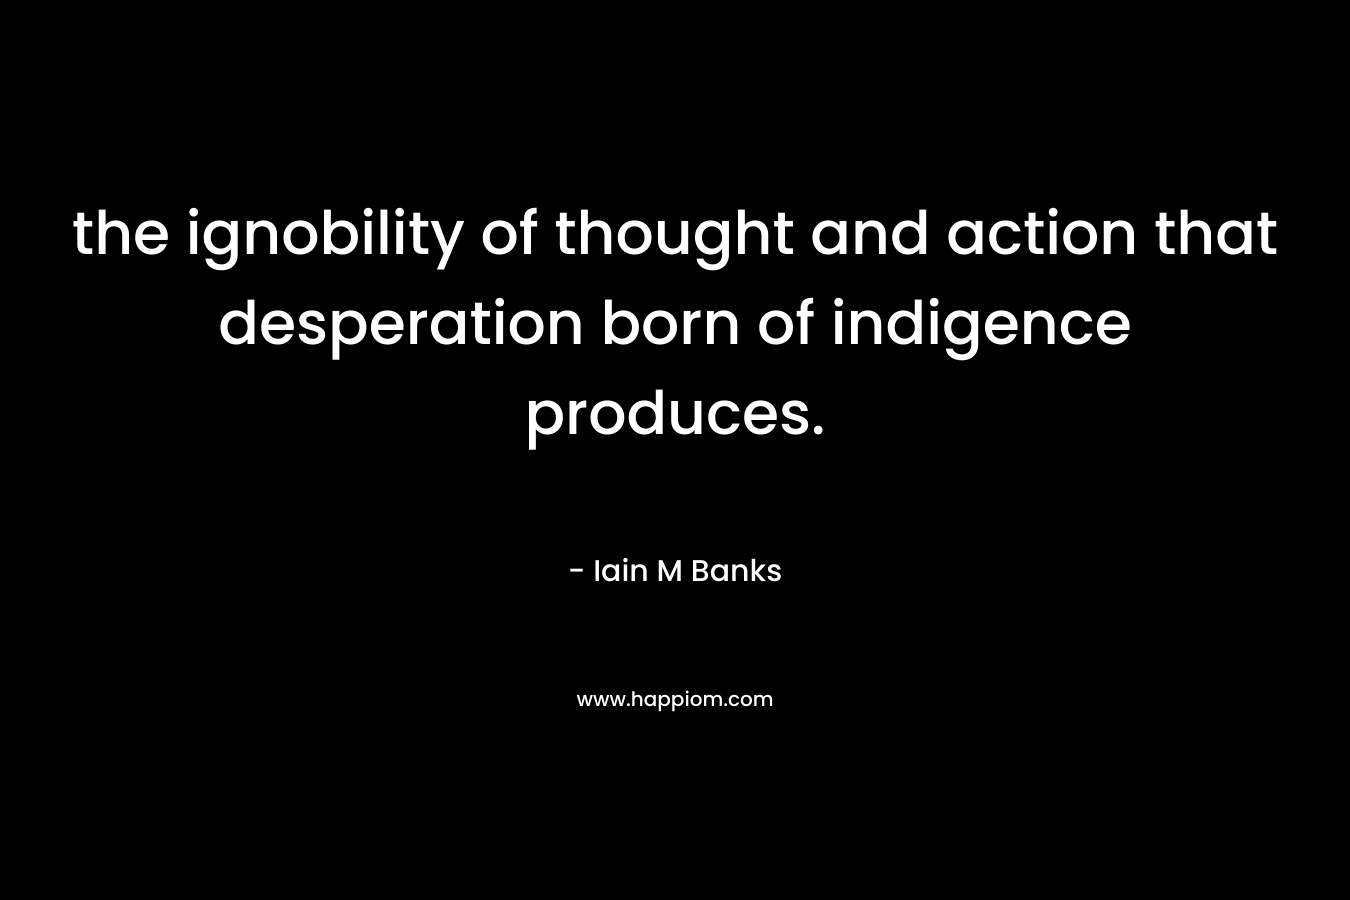 the ignobility of thought and action that desperation born of indigence produces. – Iain M Banks